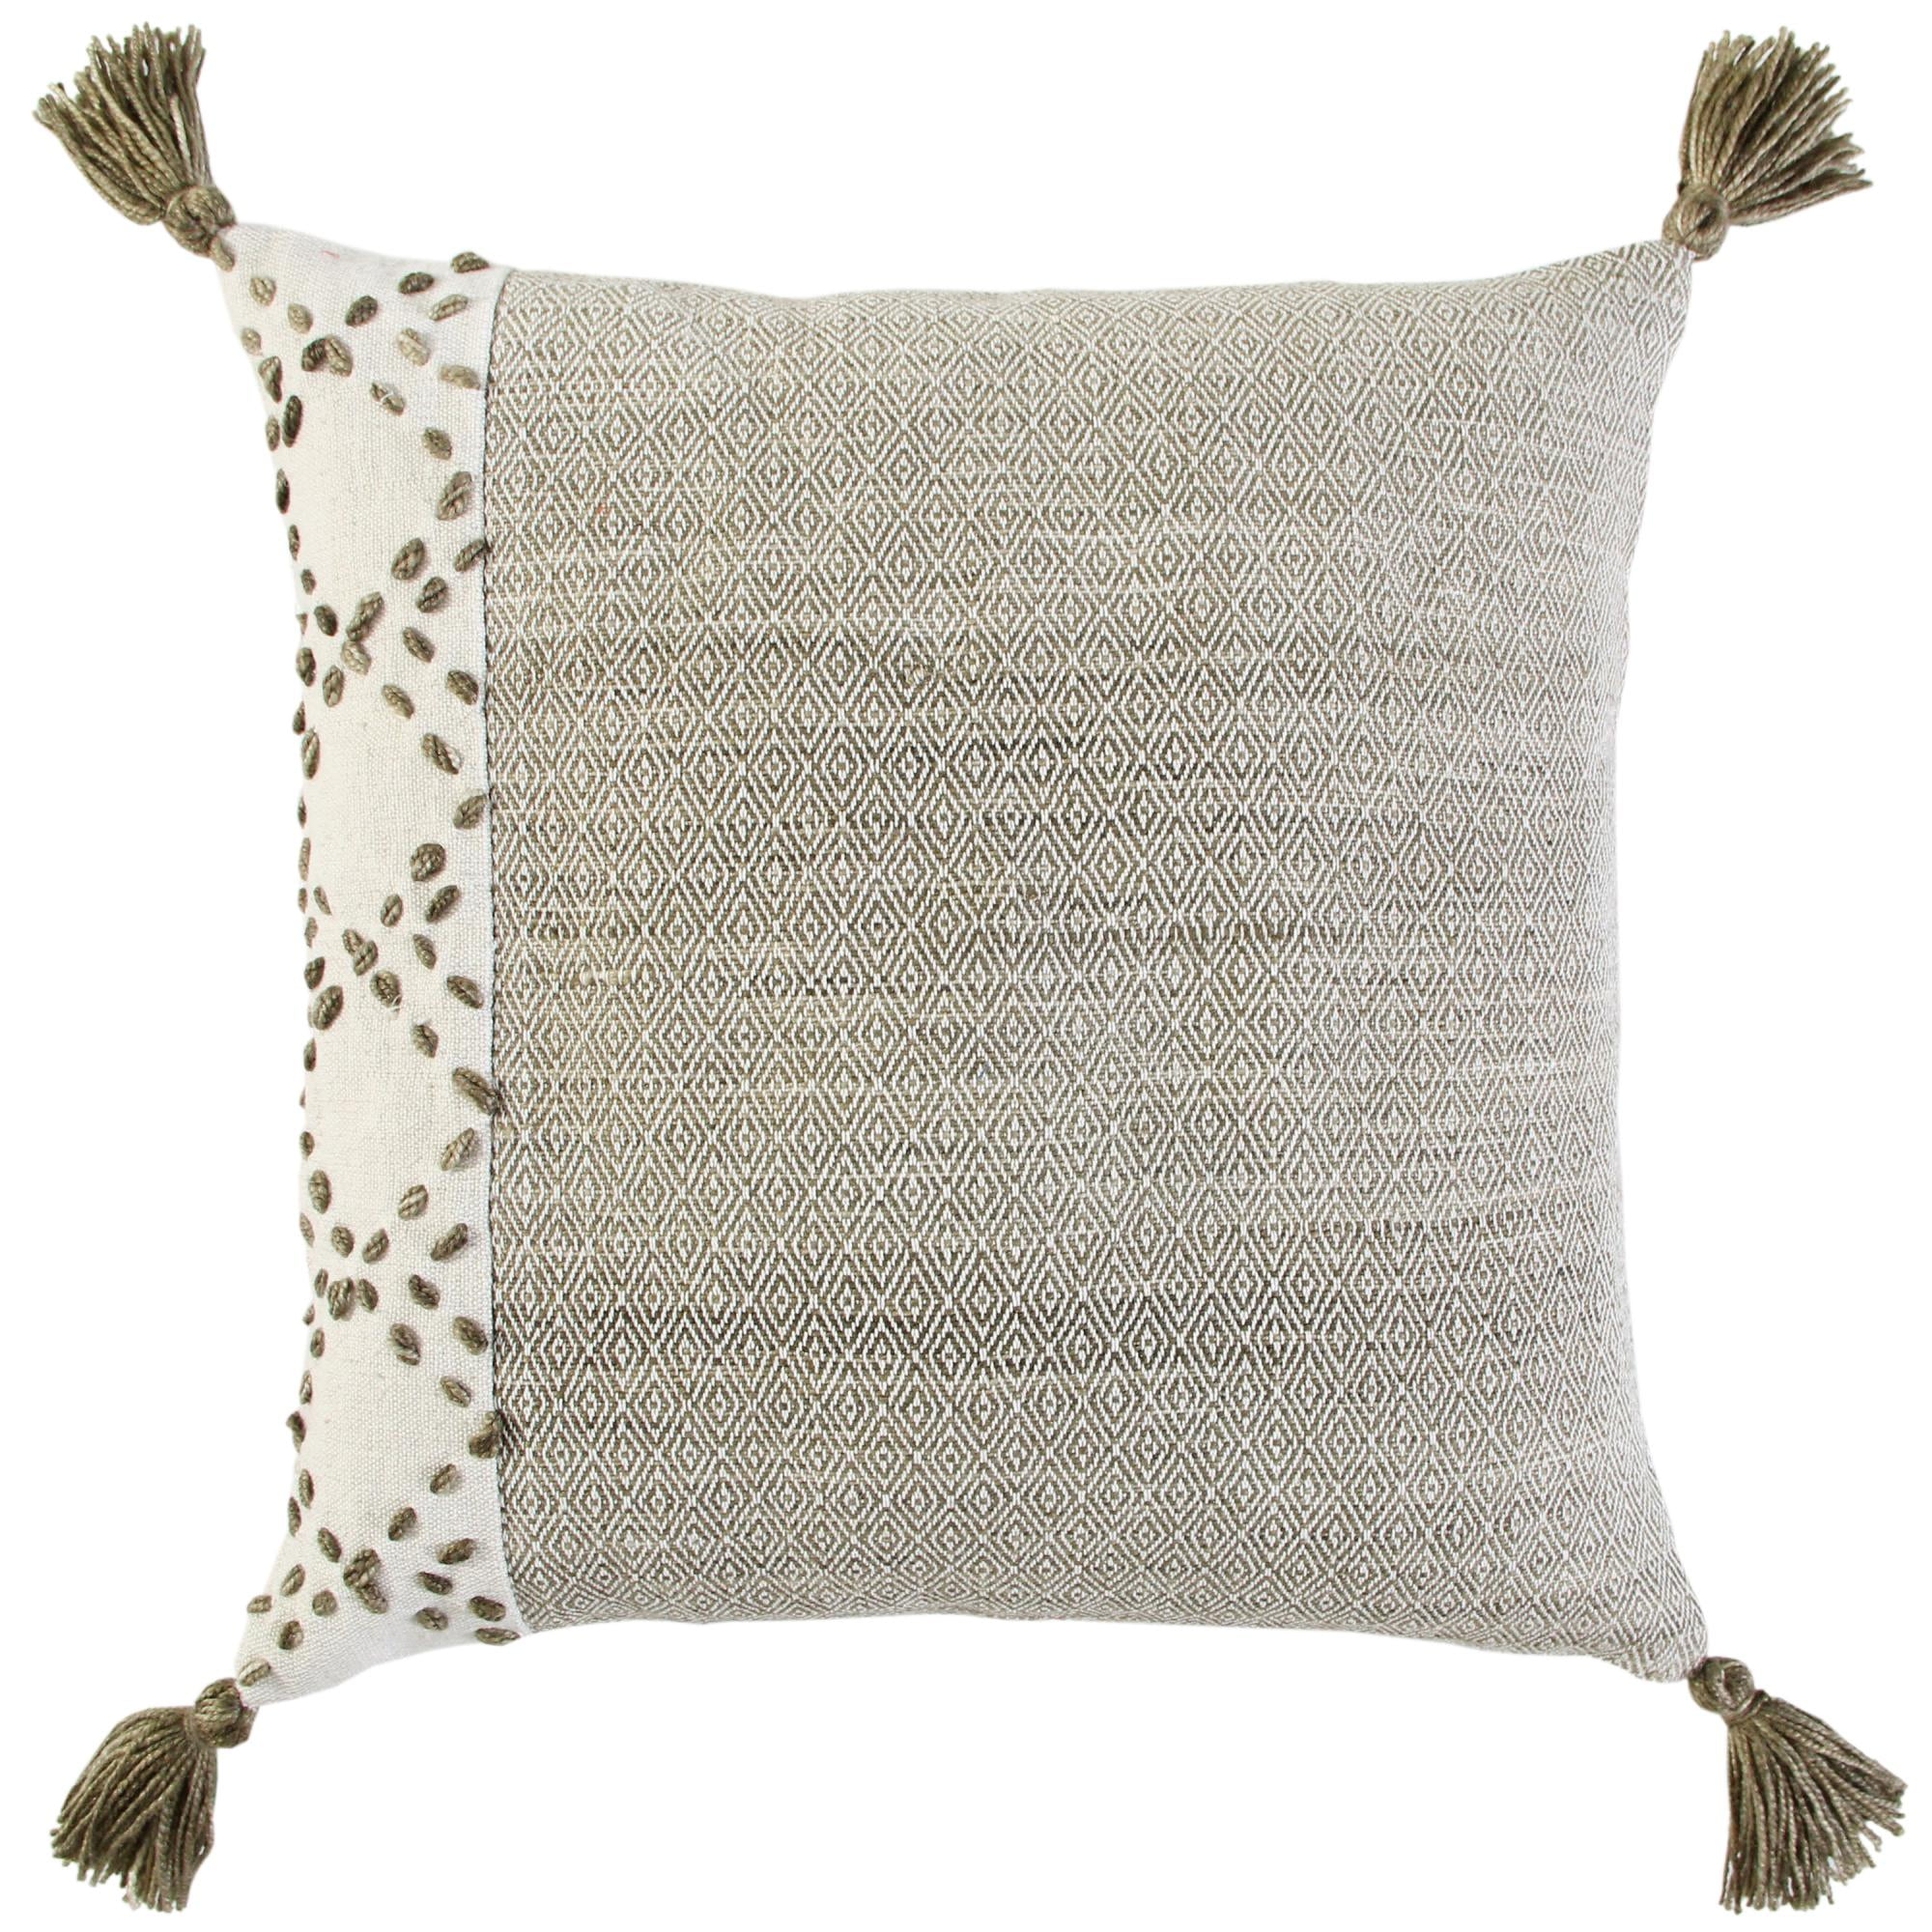 Bloomingville Grey Quilted Recycled Wool Pillow with Gold Zipper 